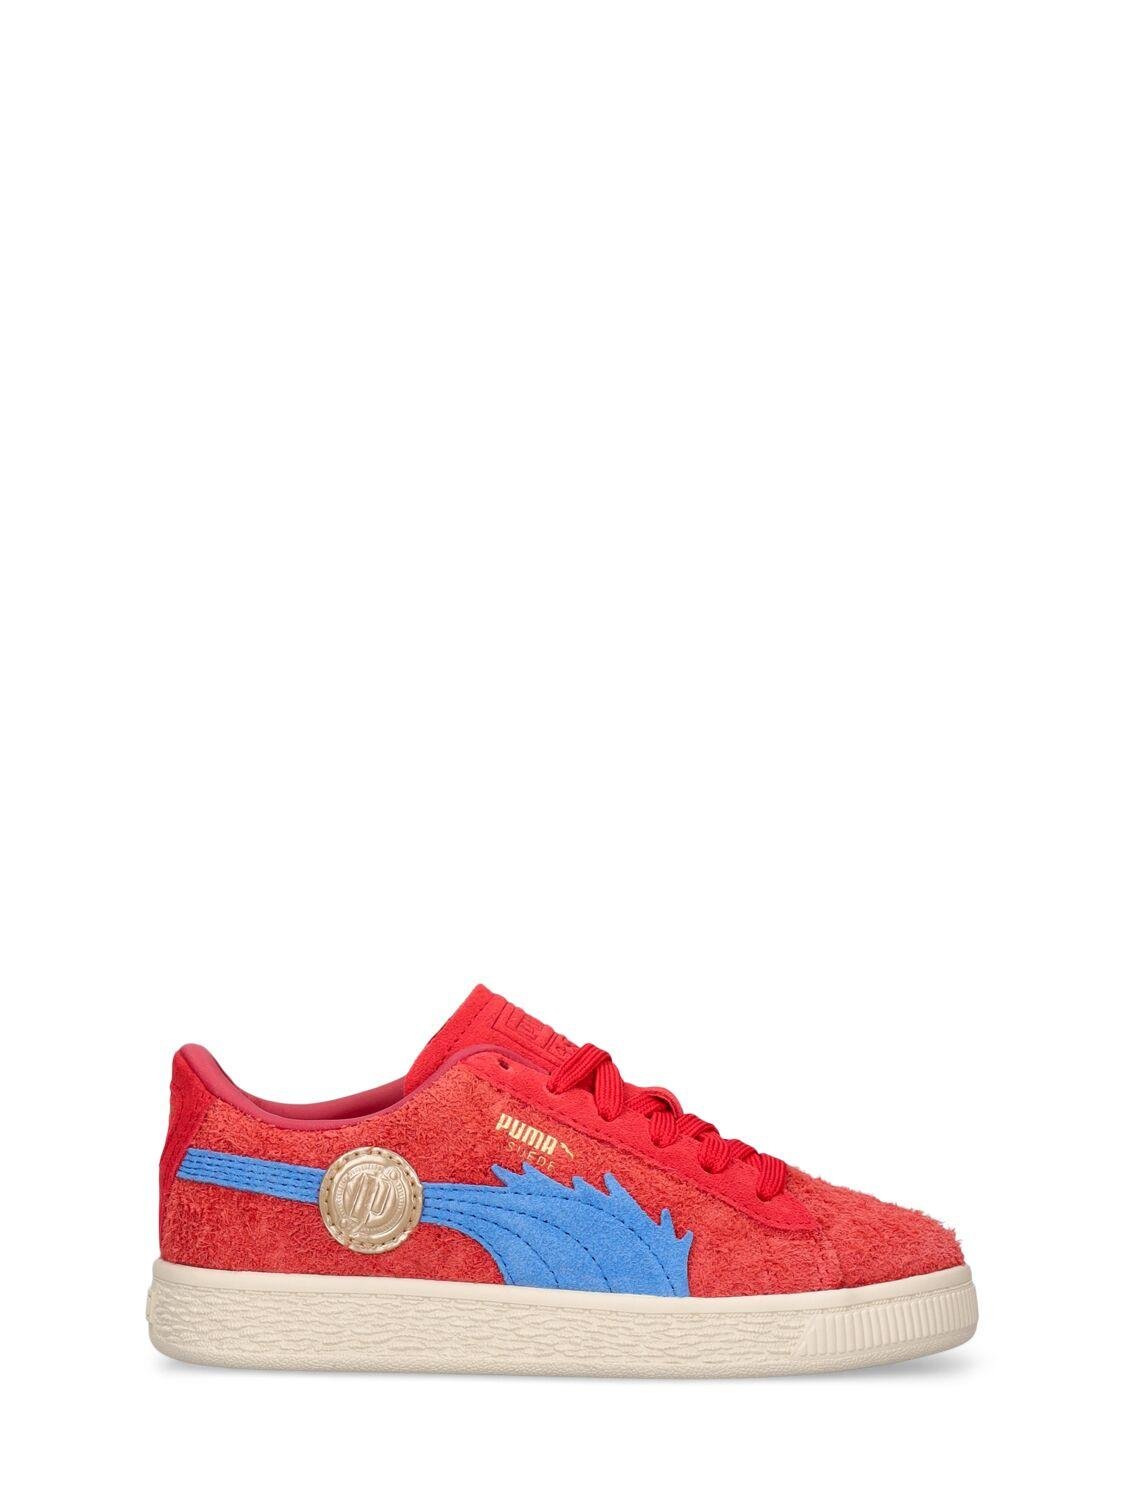 One Piece Suede Lace-up Sneakers by PUMA